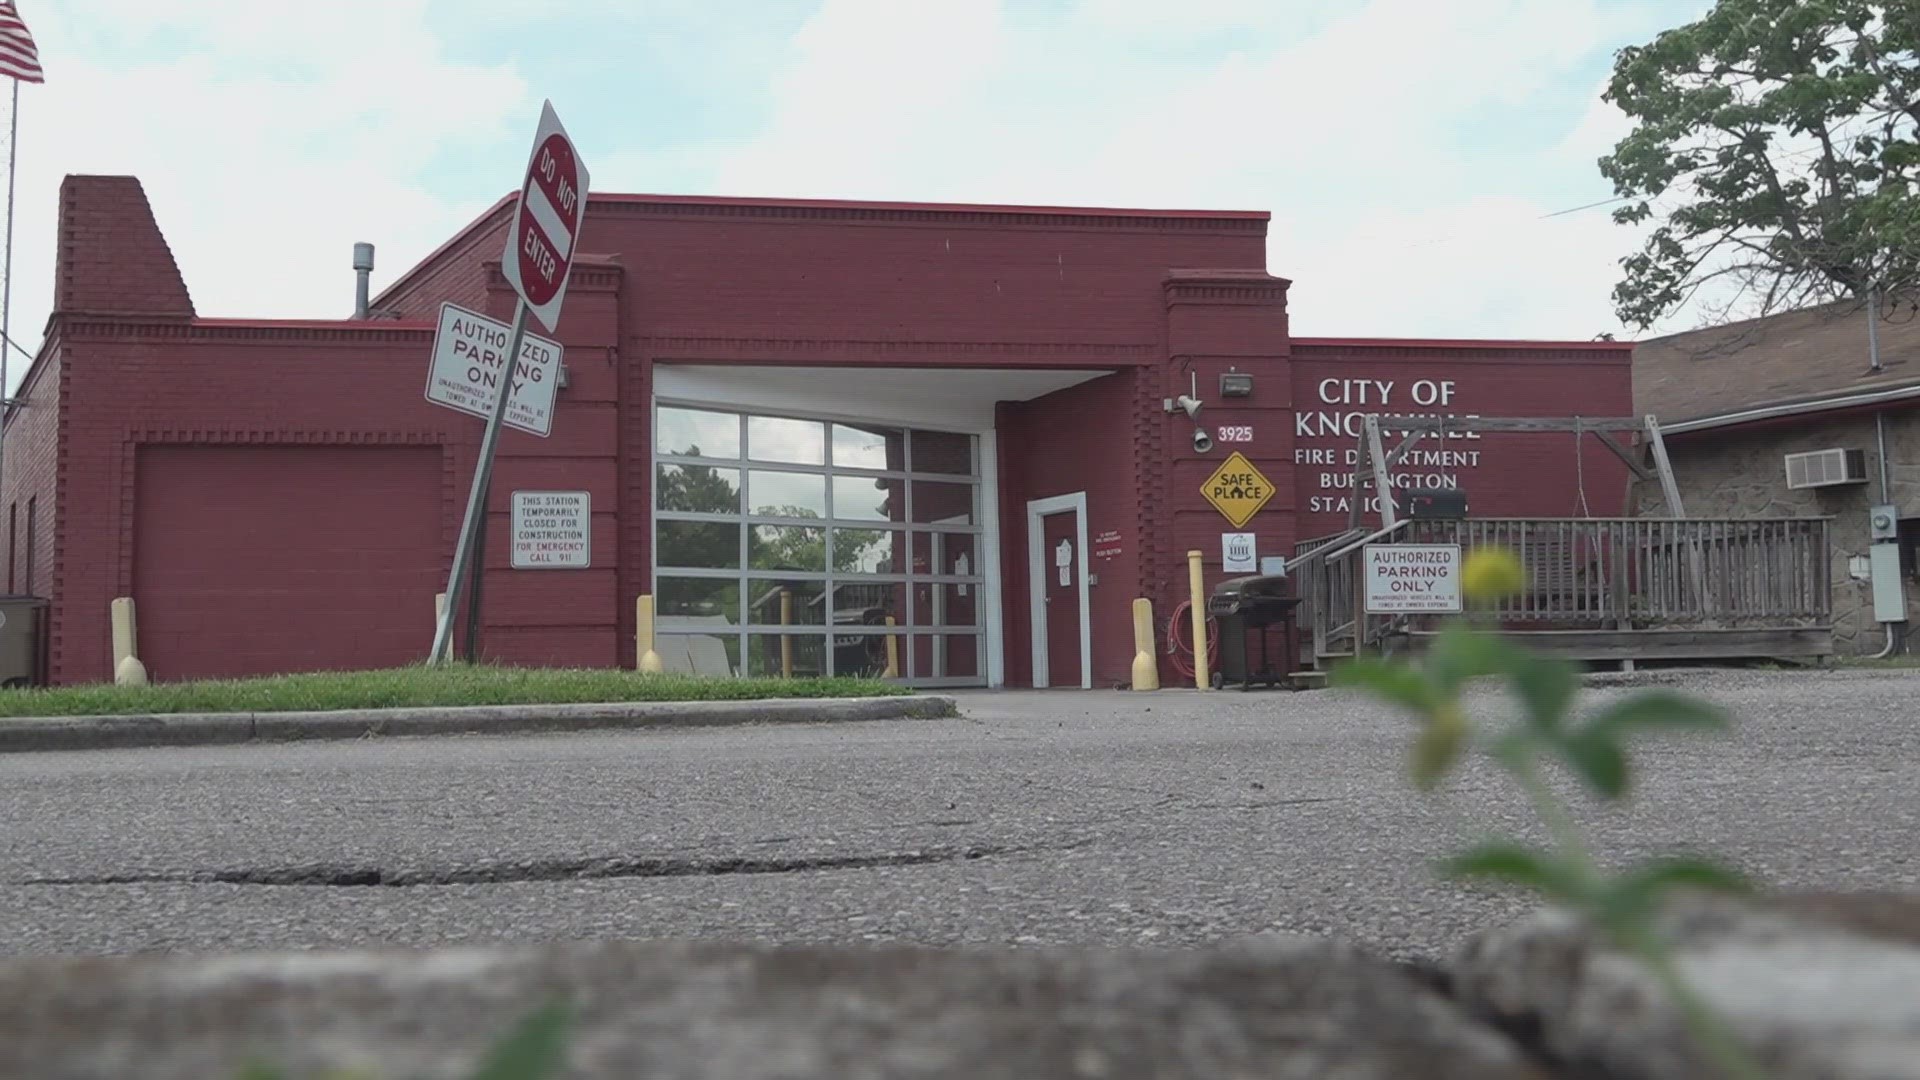 The old Burlington fire station on Holston Drive has structural issues. The city says crews can work in it again as it prepares to build a new station to replace it.